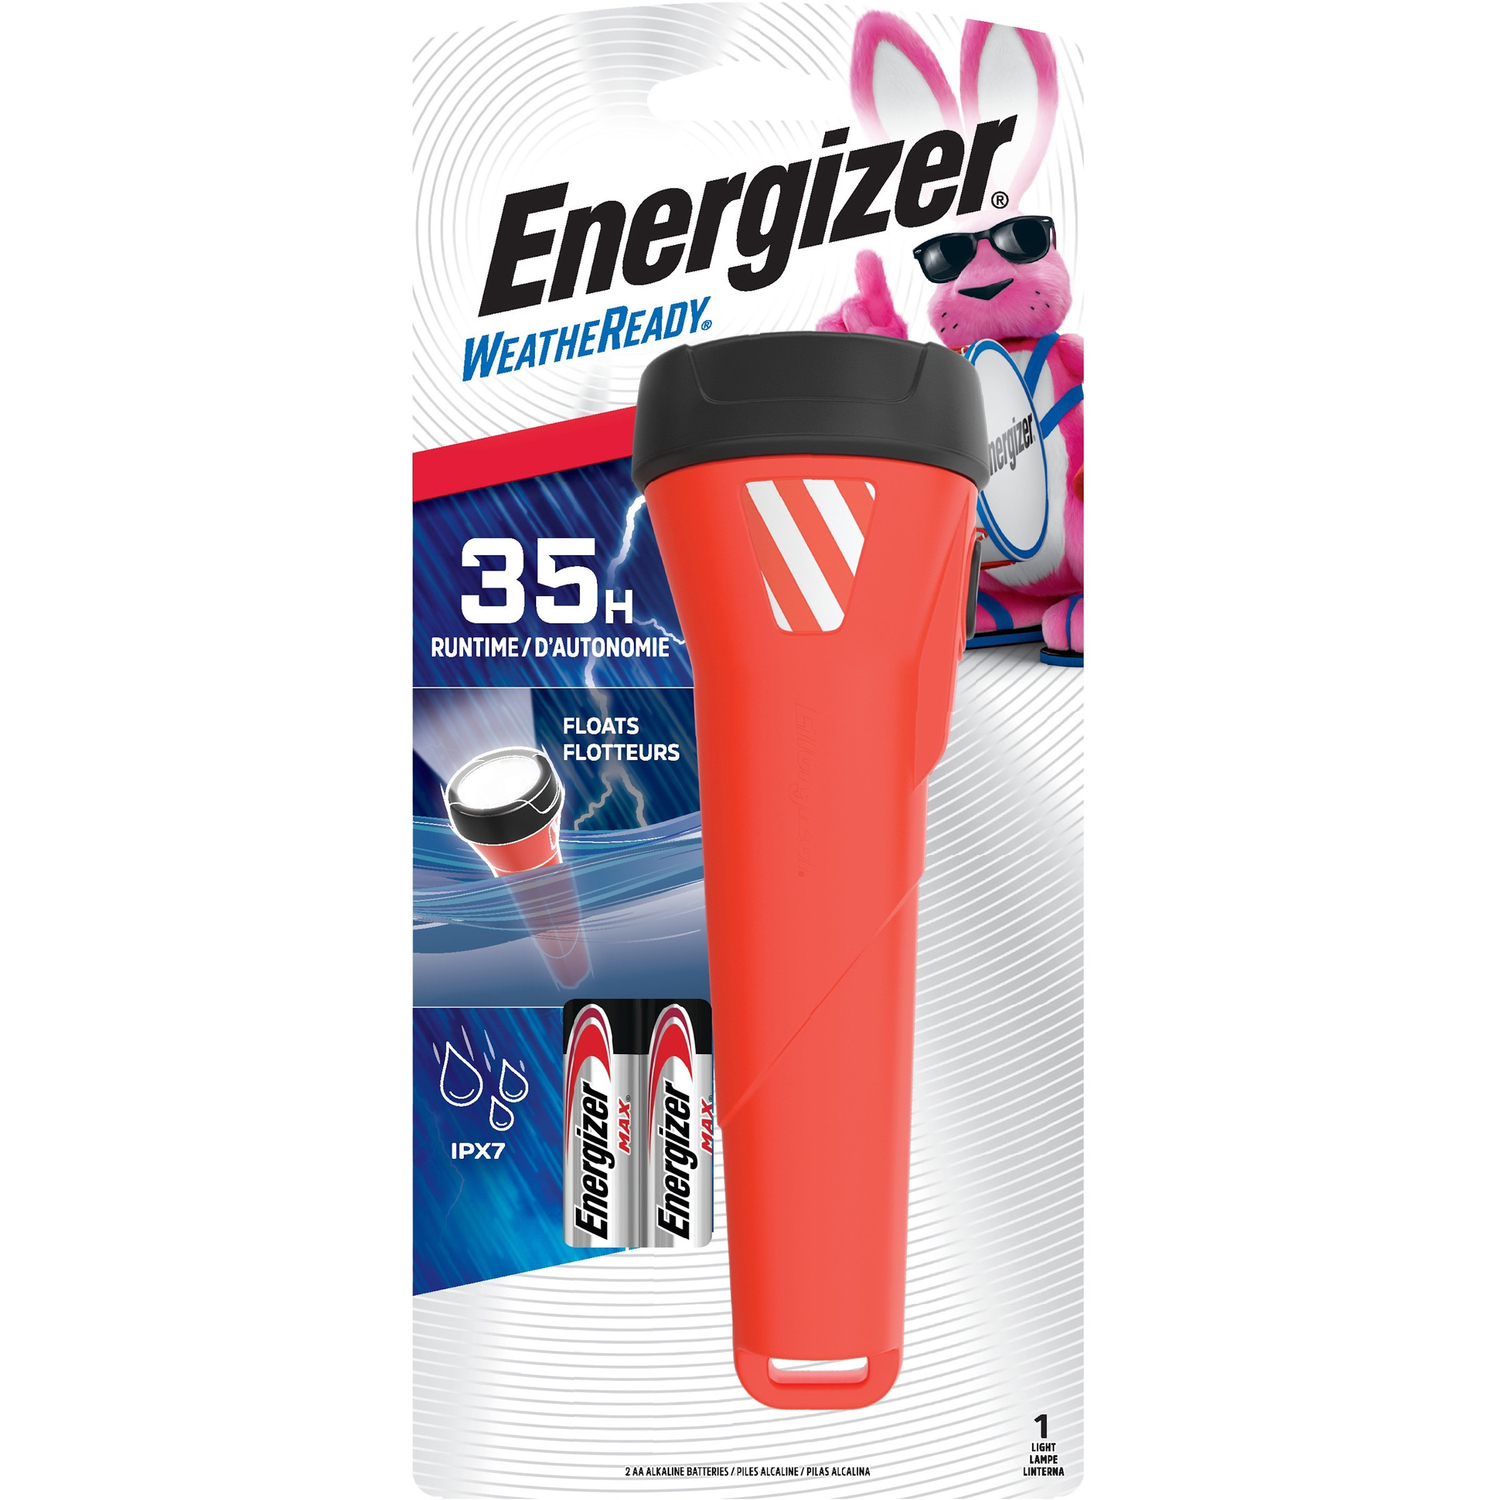 Photos - Torch Energizer Weatheready 75 lm Black/Red LED Flashlight AA Battery WRWP21E 